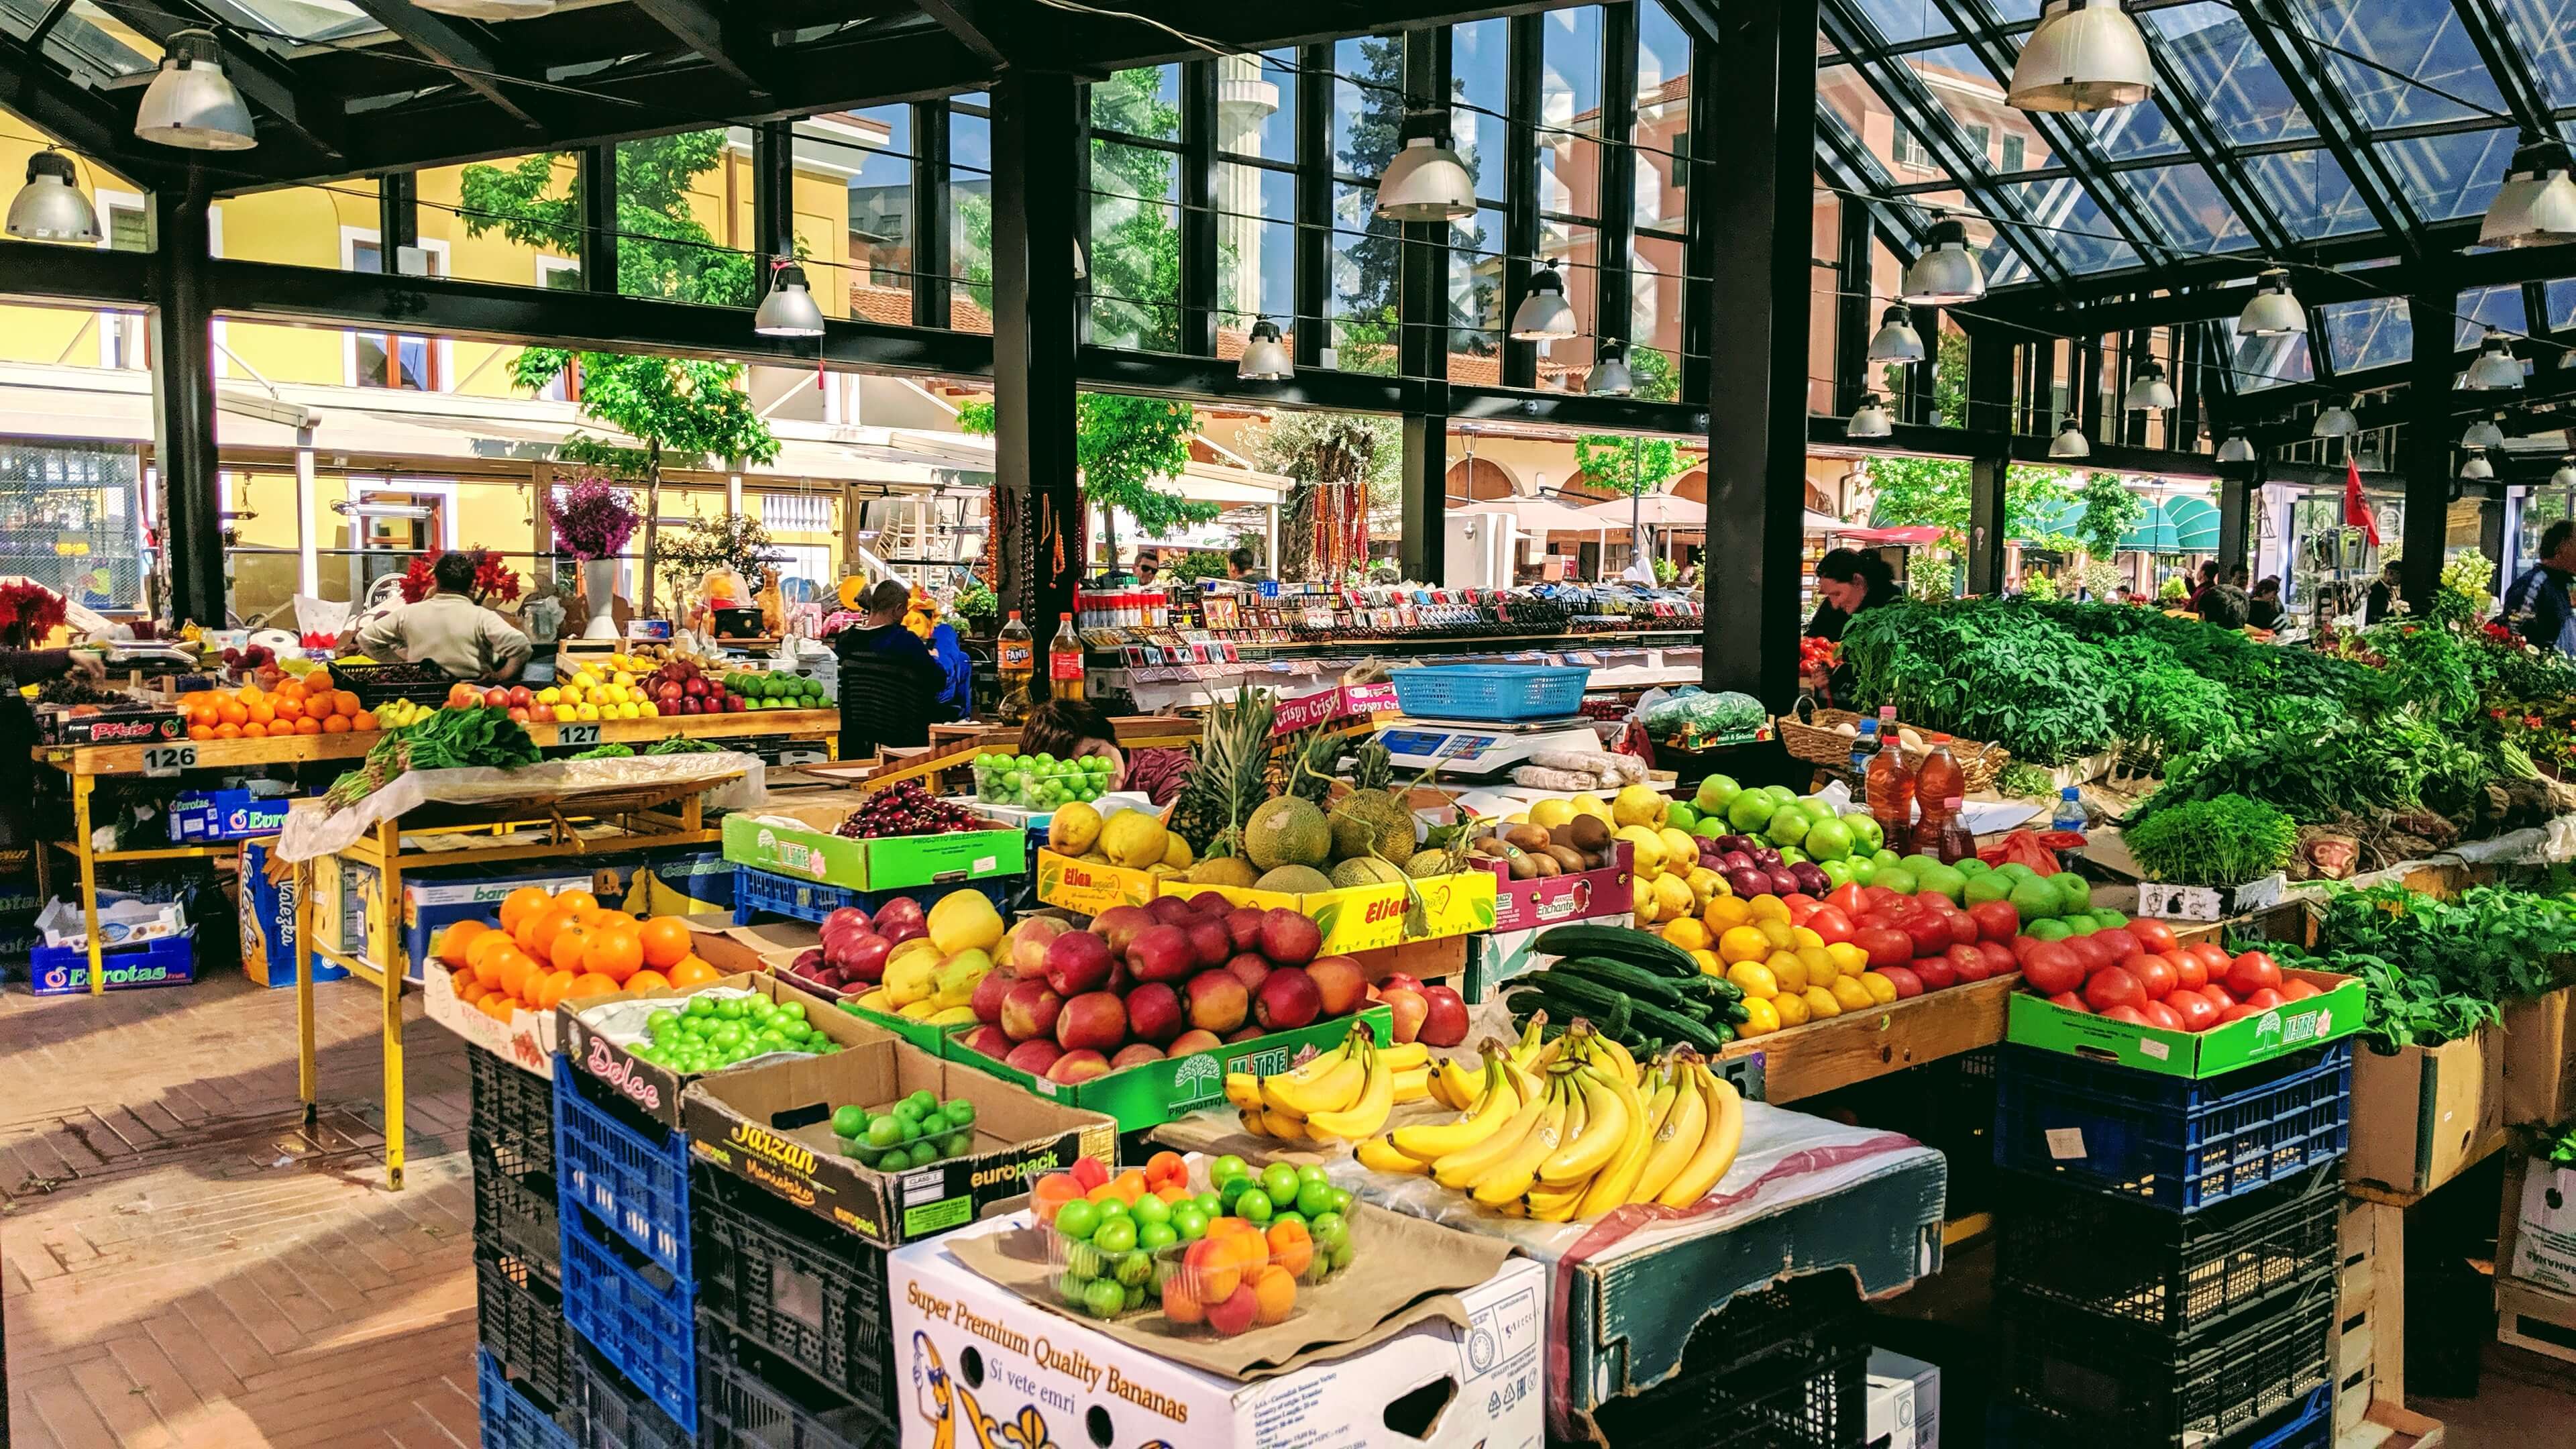 Tirana's open air market filled with fresh fruit and vegetables and tons of color.